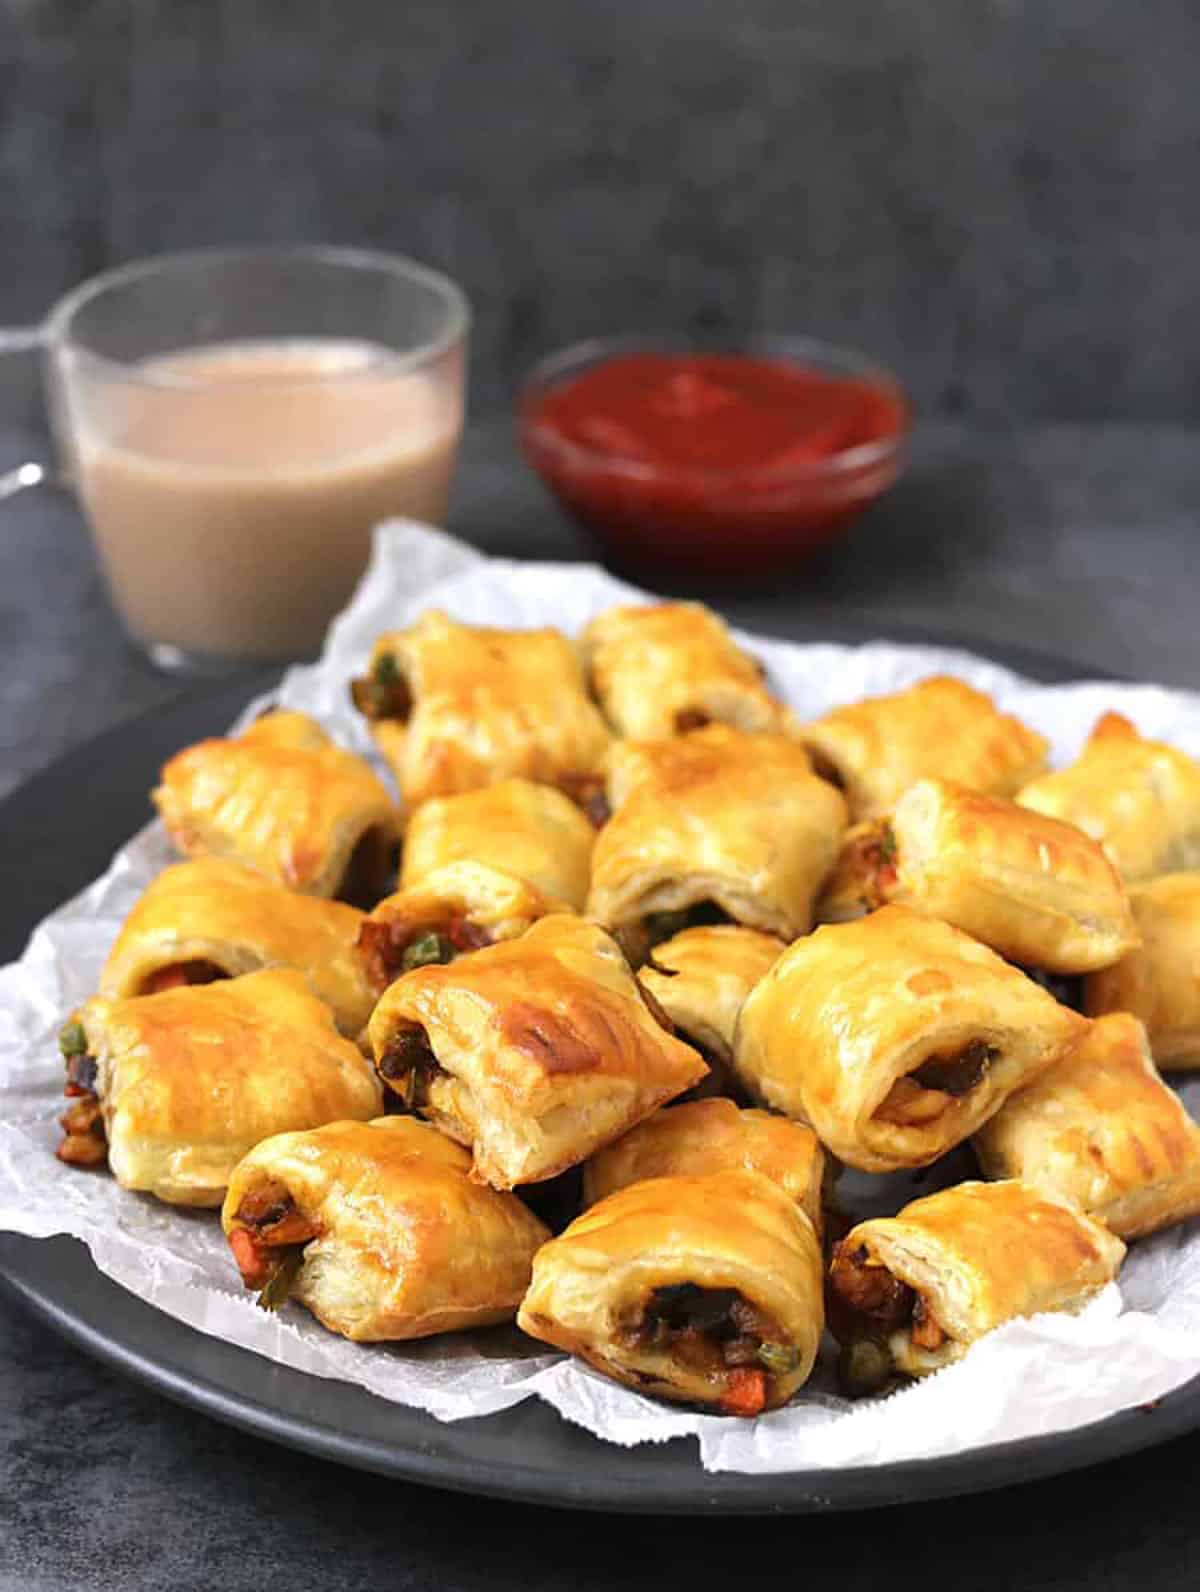 Bakery-style Indian veg puffs/curry puff pastry bites served with hot tea (chai) & tomato ketchup. 